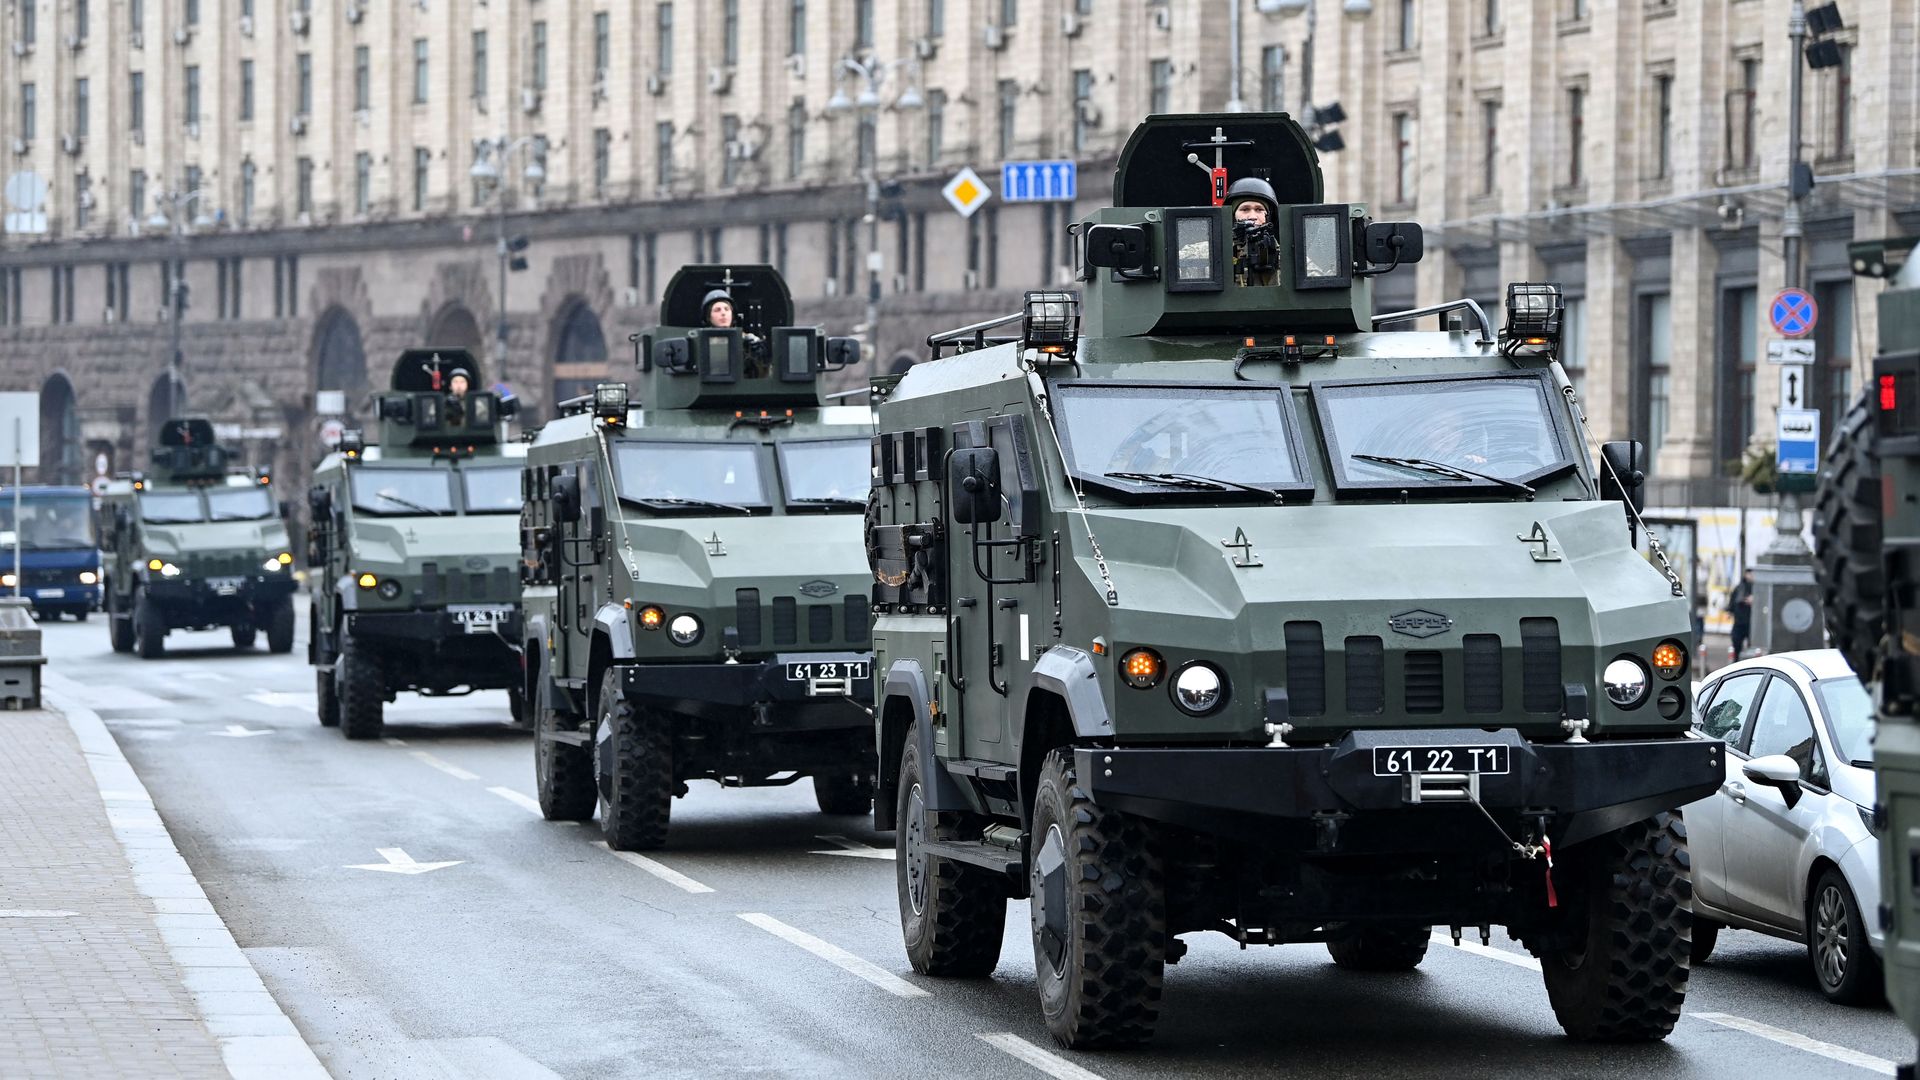 Armored vehicles from the Ukrainian armed forces drive through Kyiv on Feb. 24, 2021.